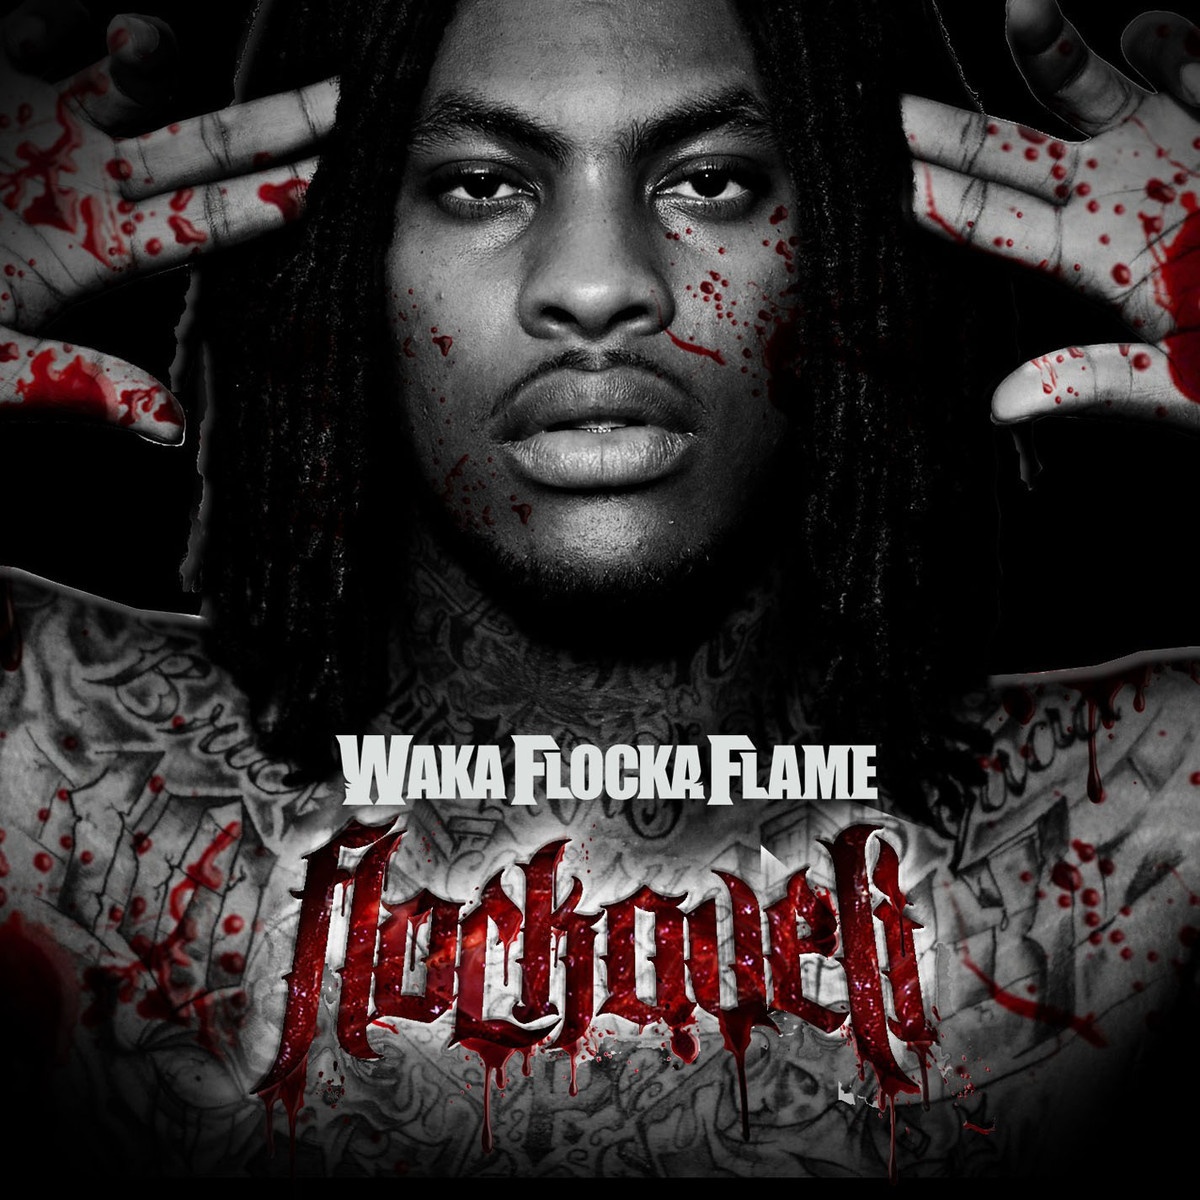 No Hands (feat. Roscoe Dash and Wale) [Amended Album Version]